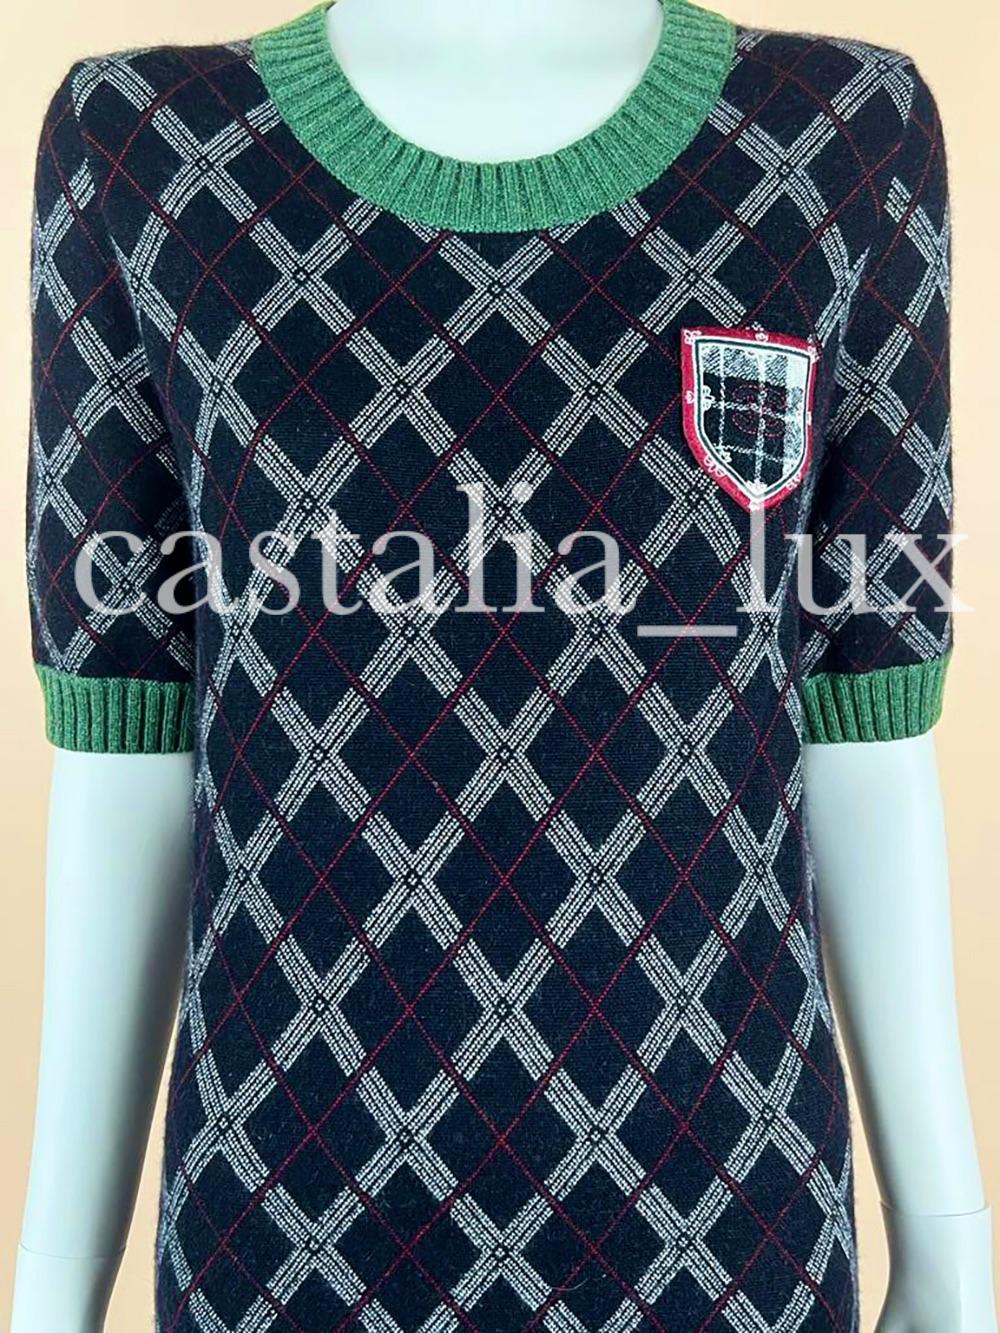 New Chanel cashmere dress with CC logo Patch from Paris / EDINBURGH 2013 Pre-Fall Metiers d'Art Collection.
Size mark 40 fr.